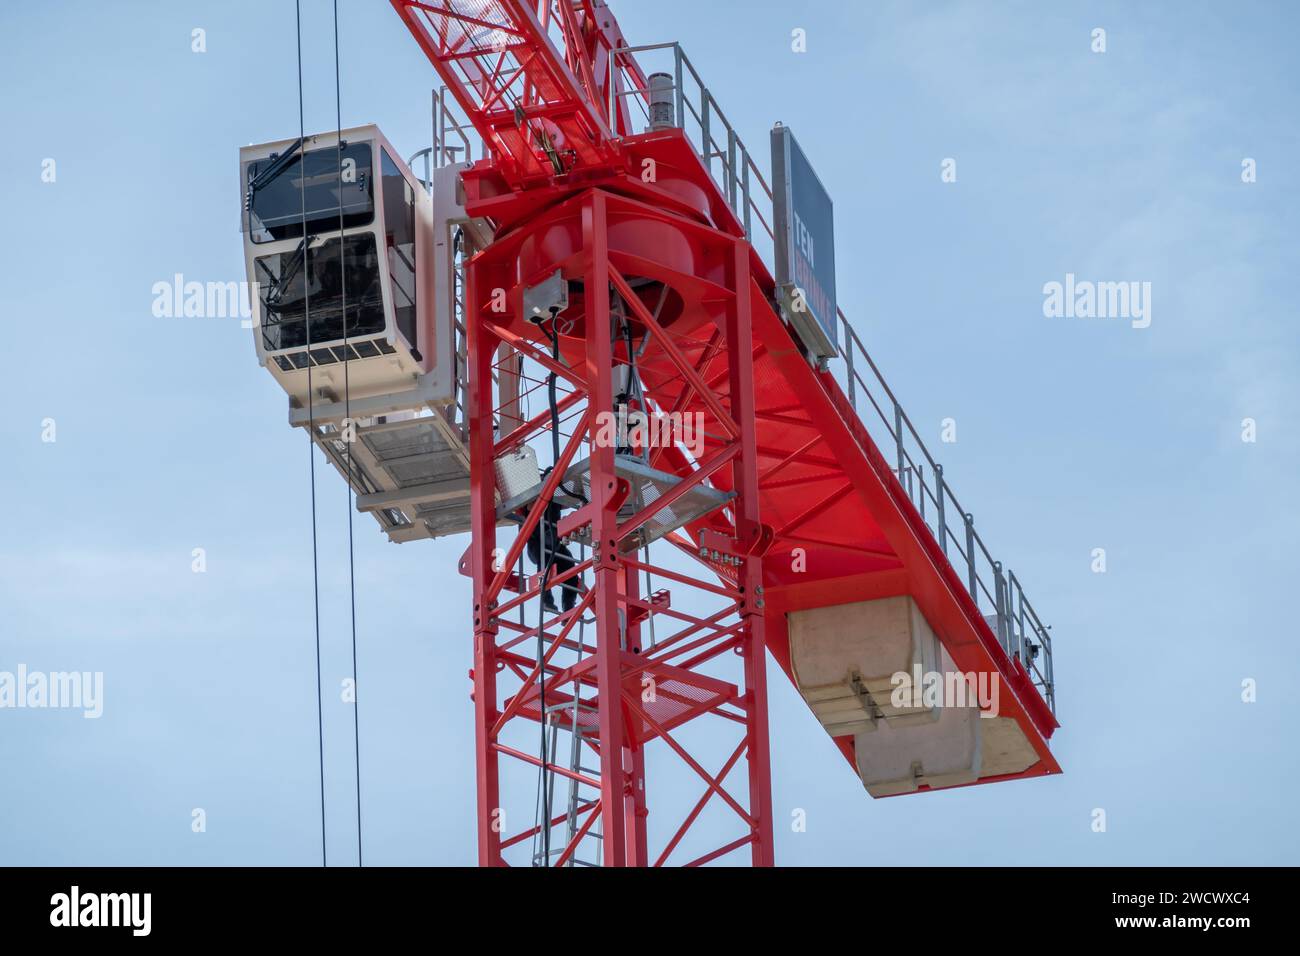 Detail of red tower crane with telescopic boom, stairs and cabin for workers, Netherlands Stock Photo